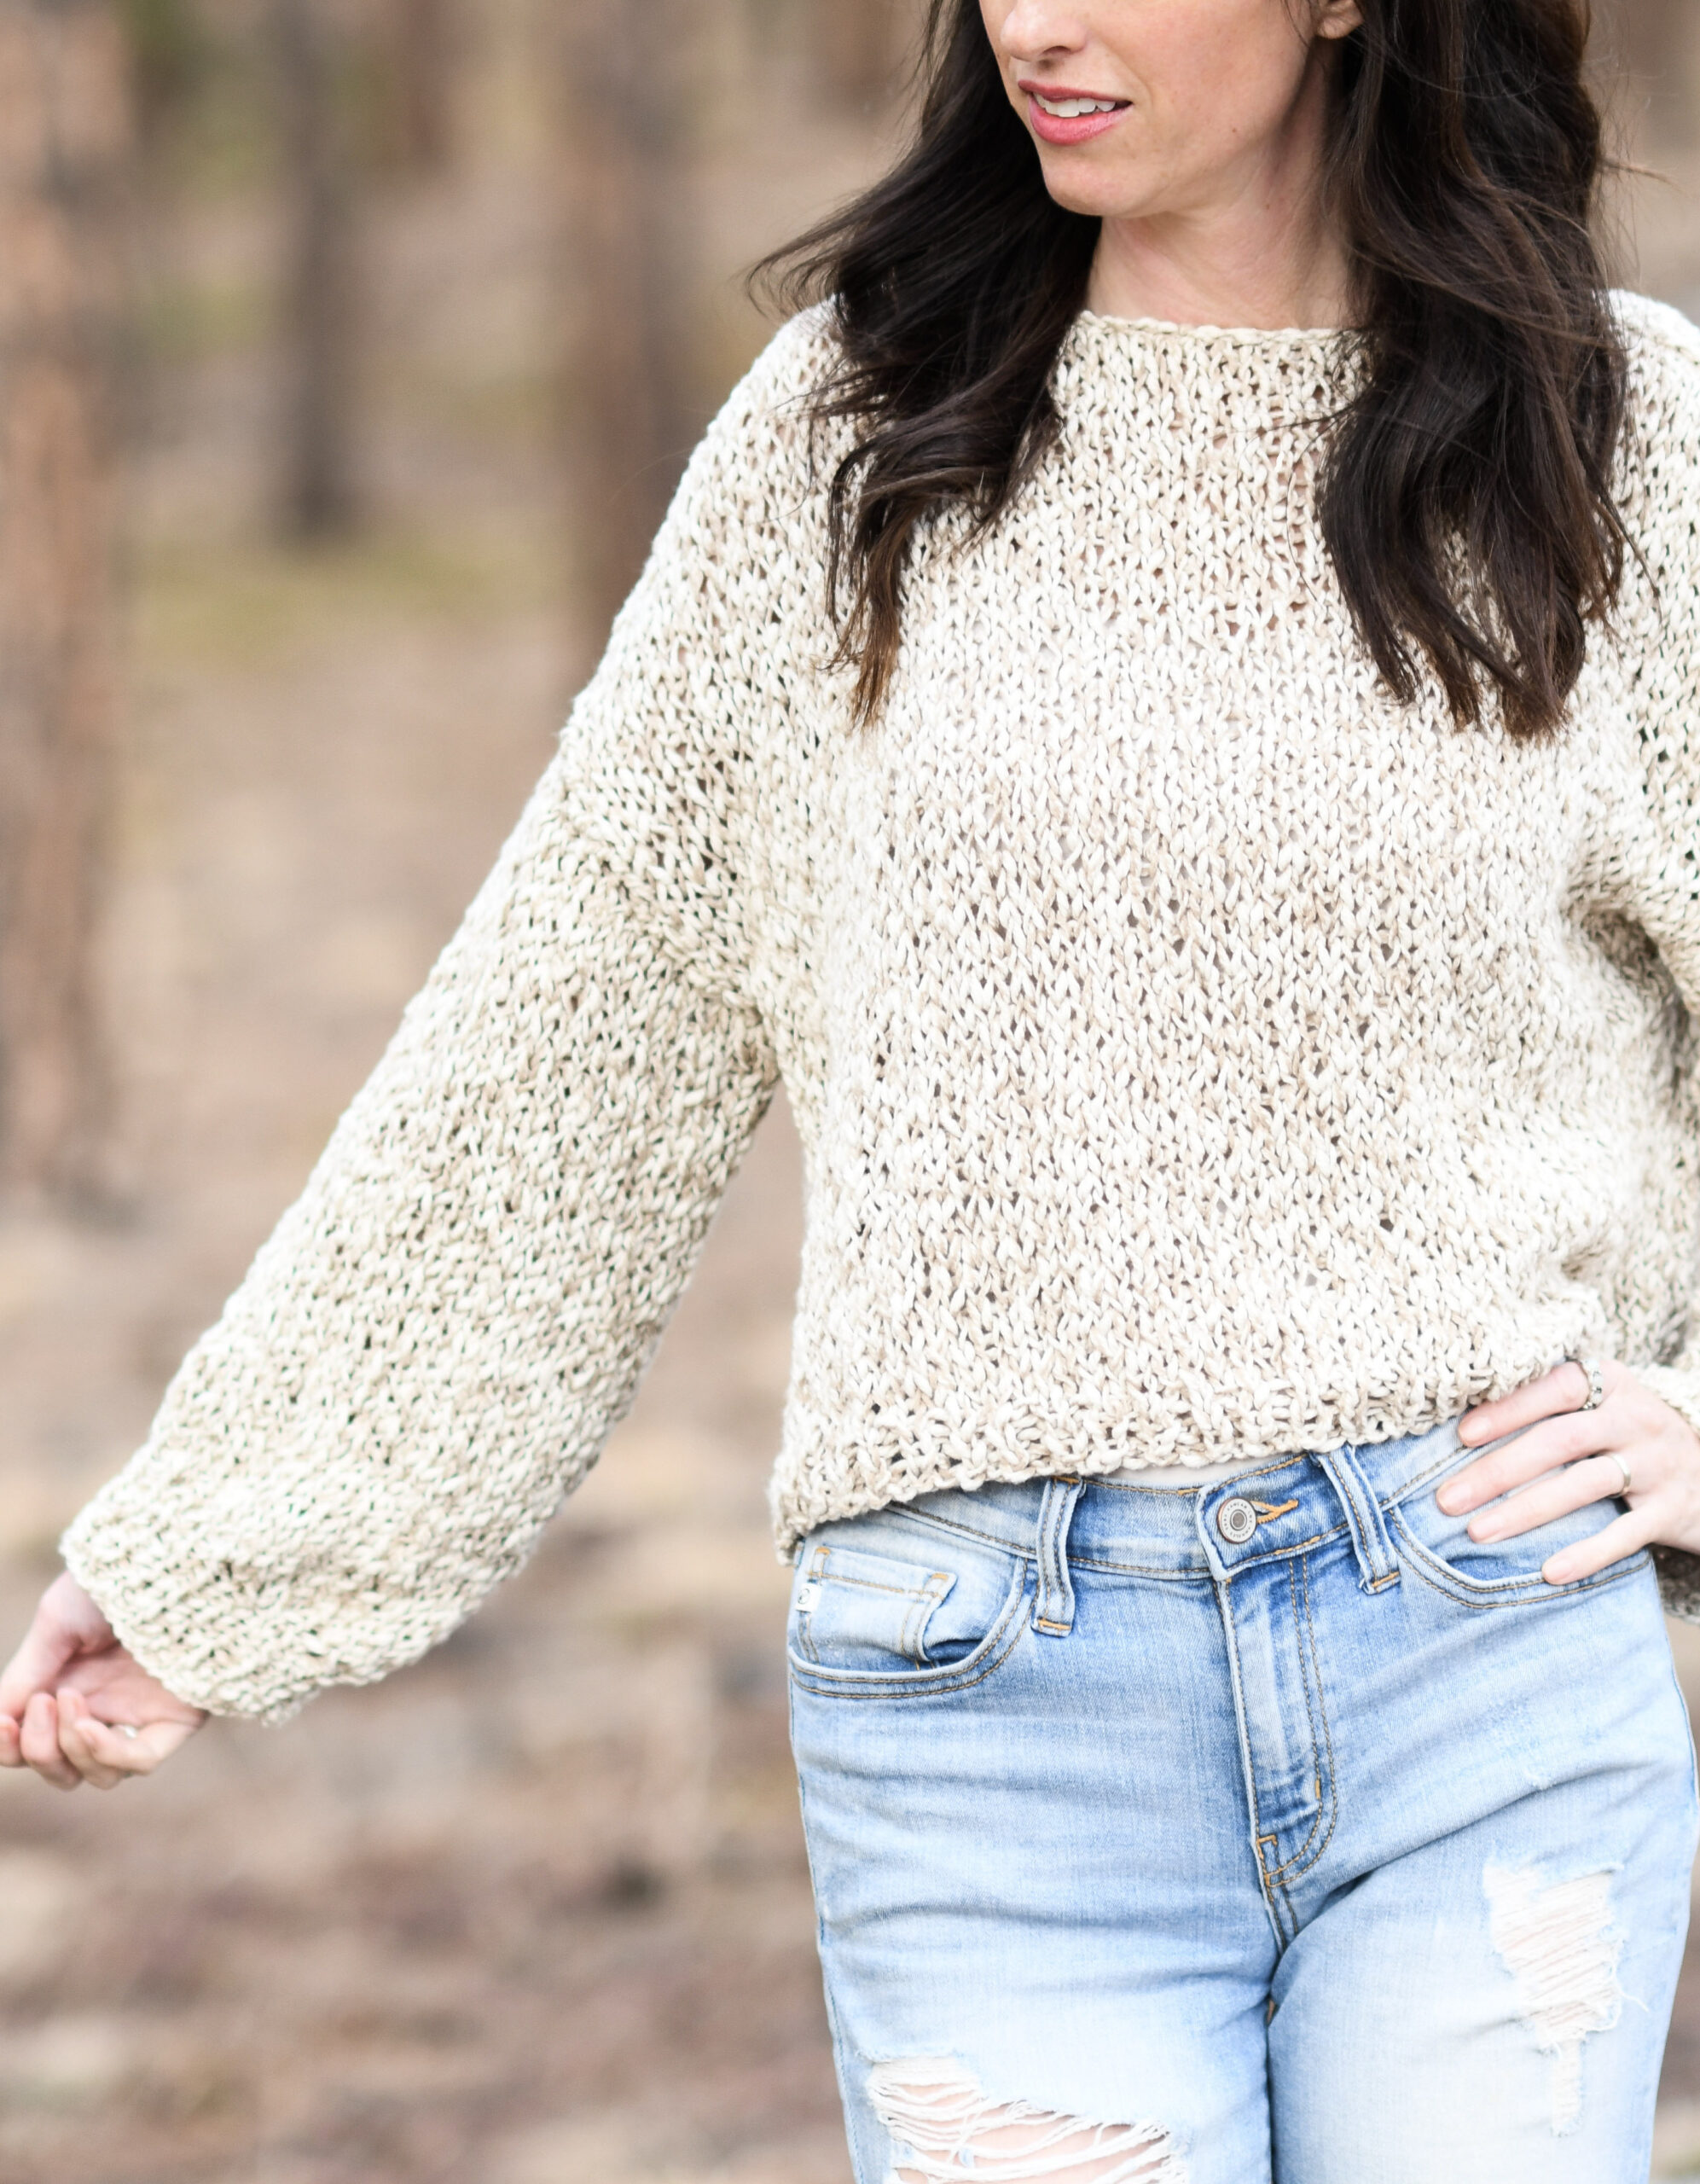 How to knit a sweater: Slouchy style sweater pattern for all levels -  KnitcroAddict